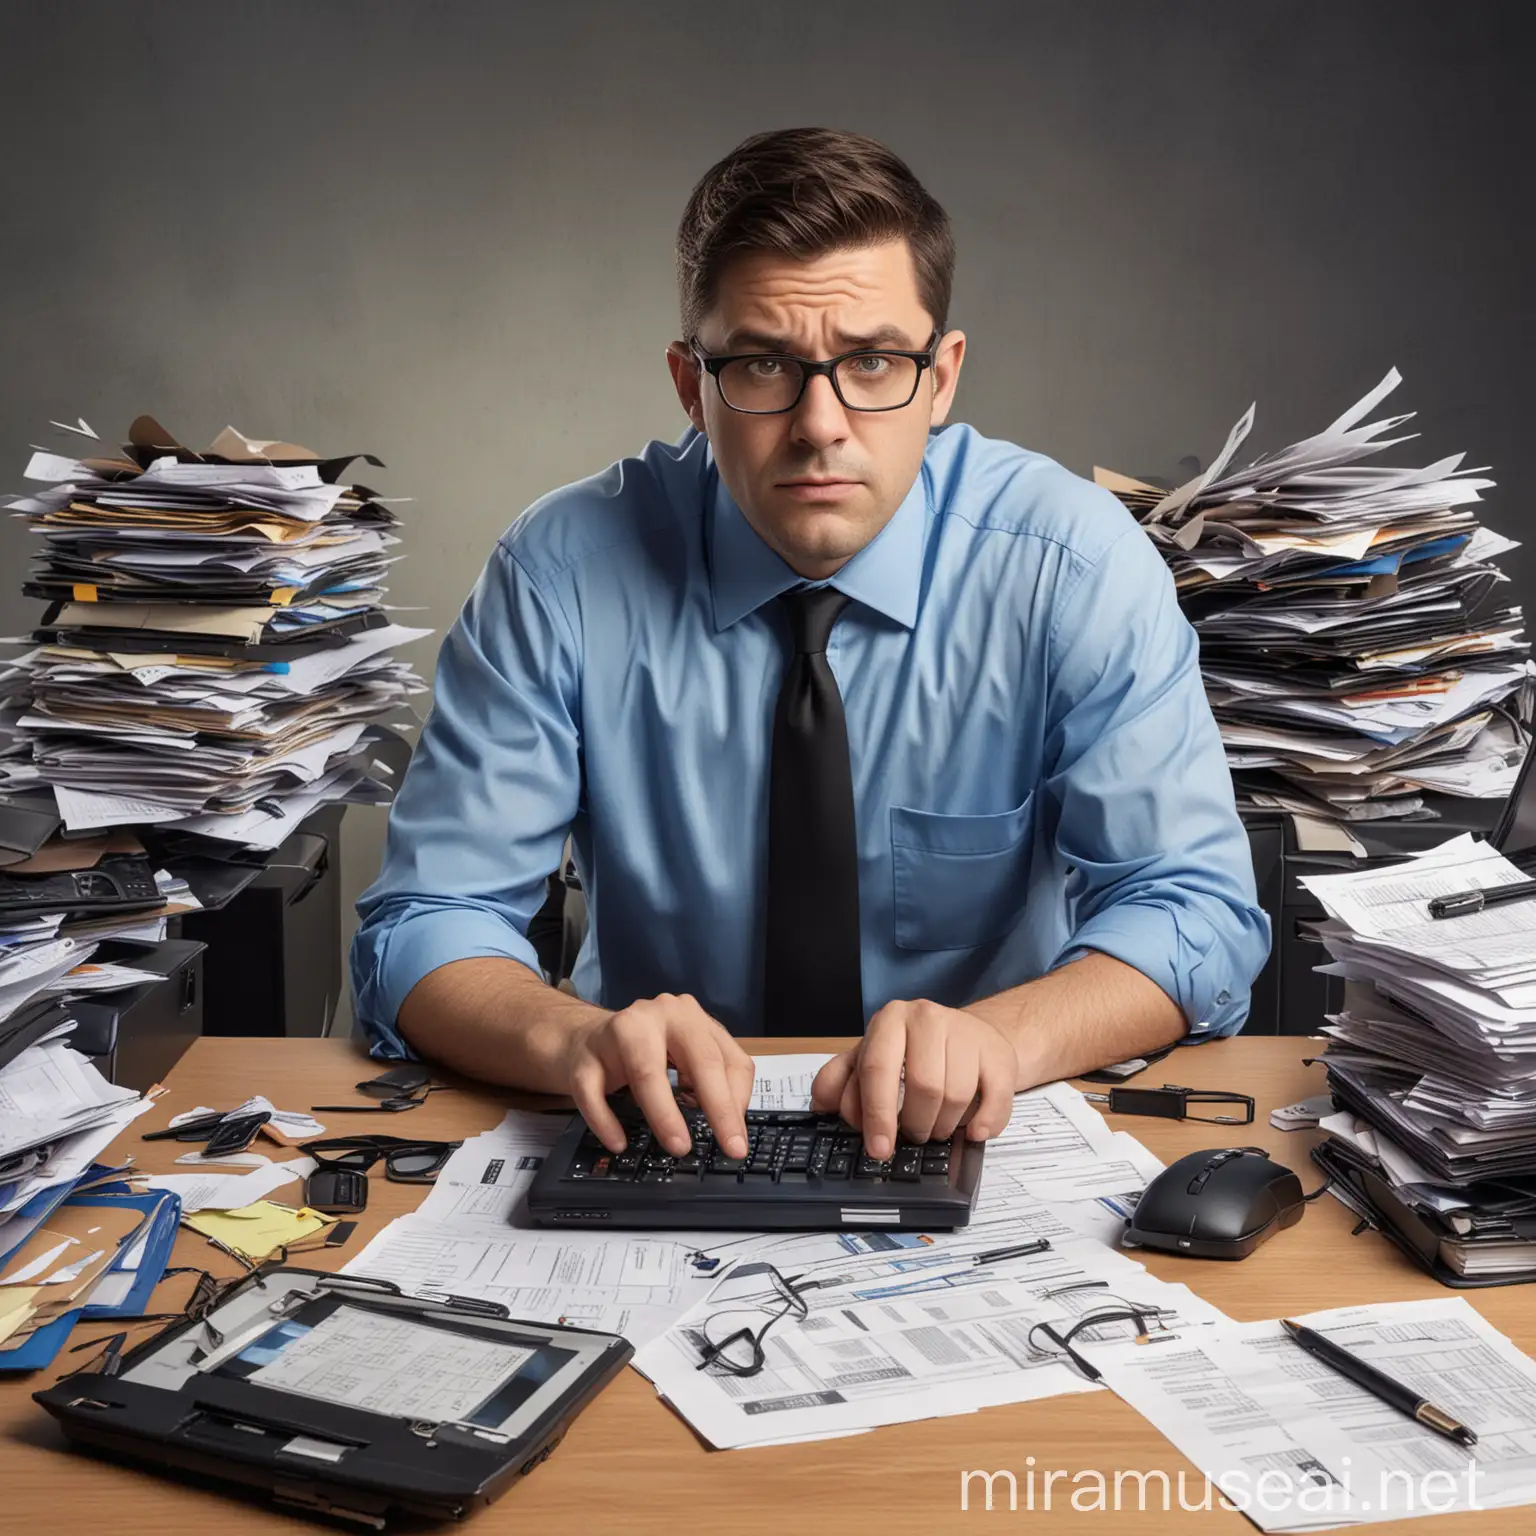 Unhappy Male Accountant Behind Cluttered Desk with Laptop